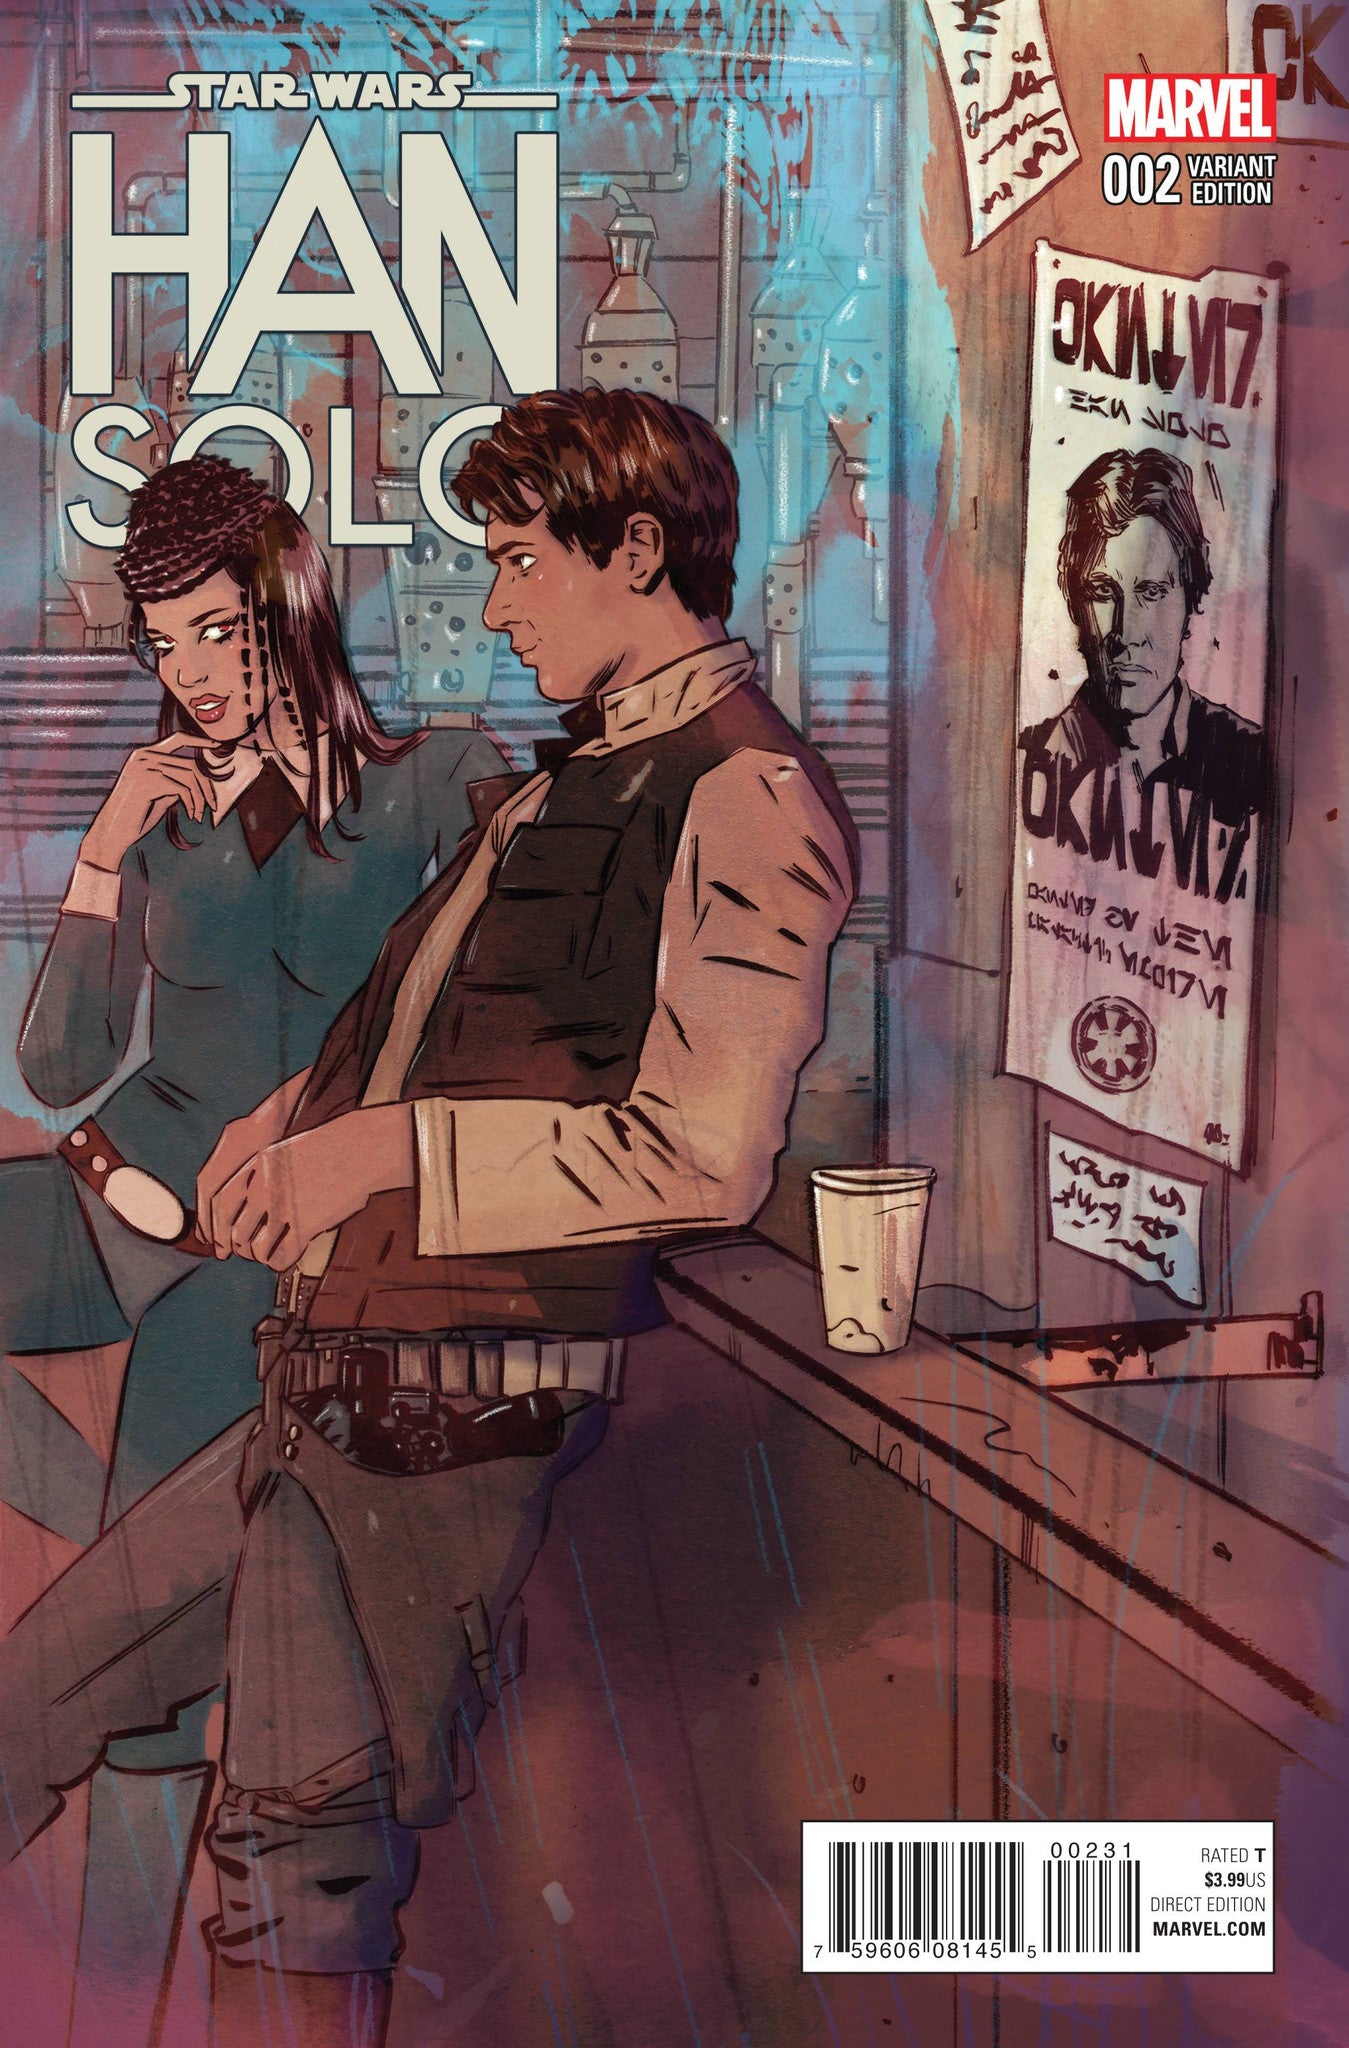 STAR WARS HAN SOLO #2 (OF 5) LOTAY VAR COVER